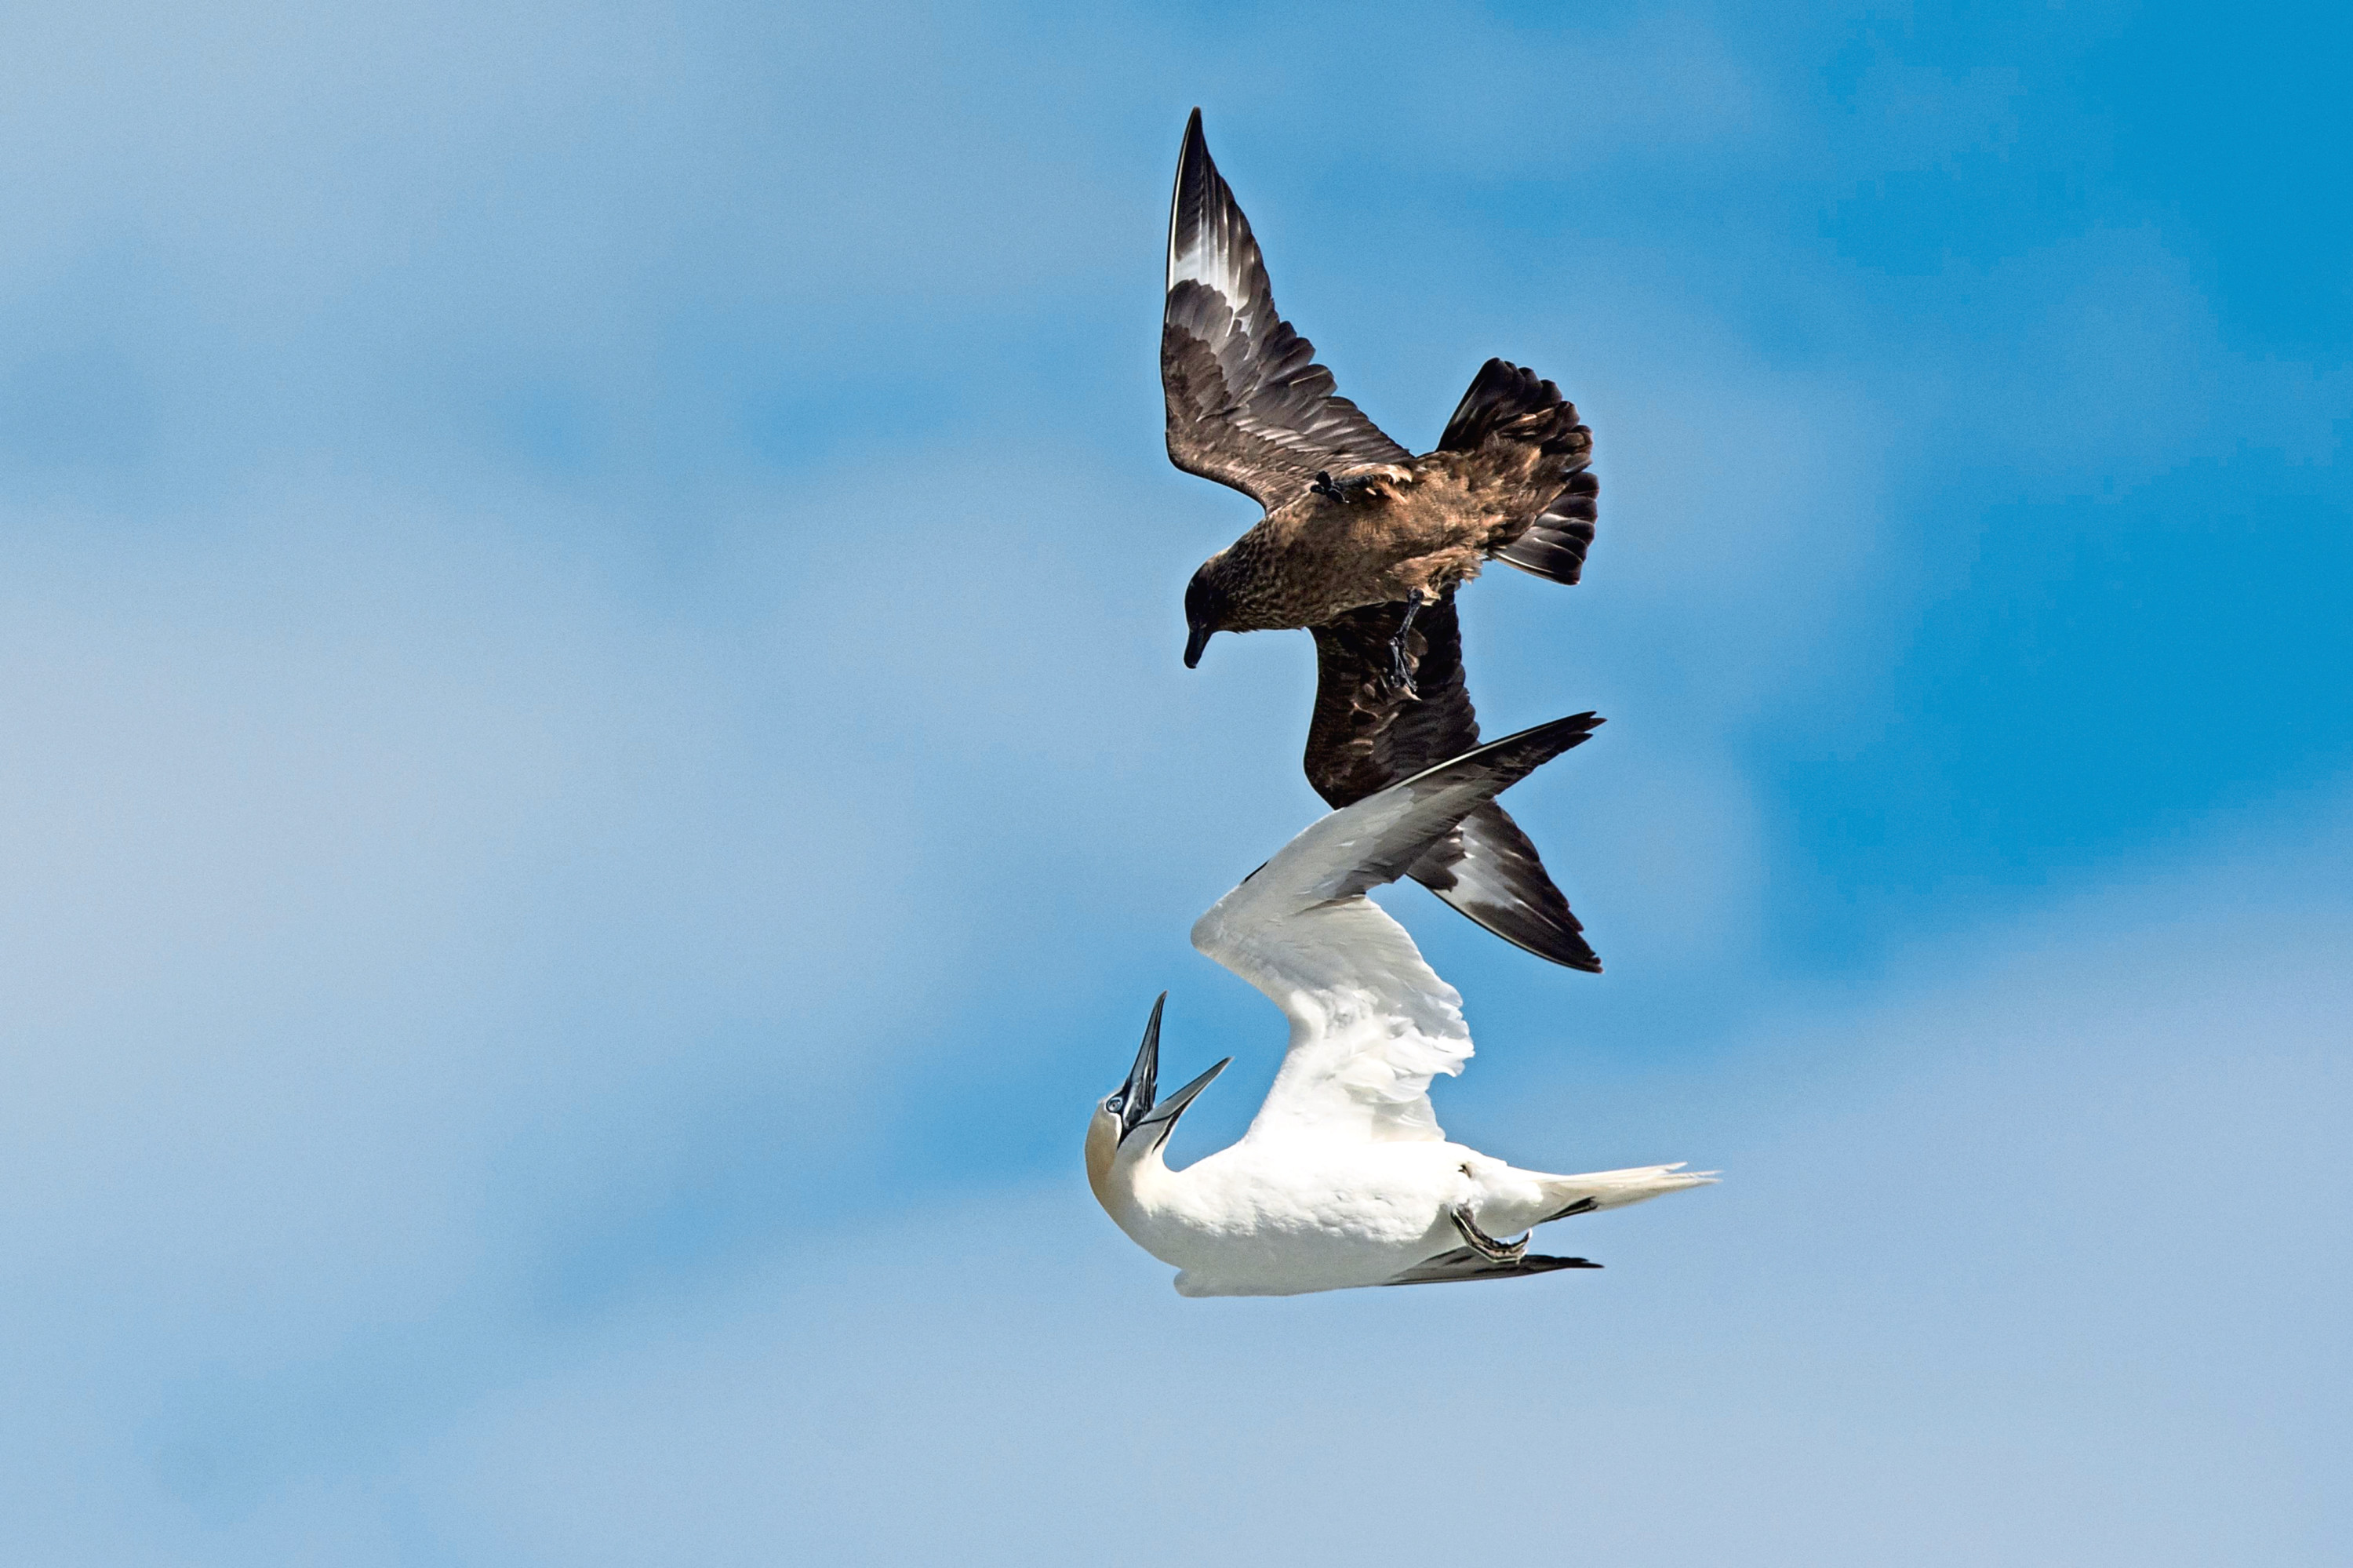 Great Skua, Stercorarius skua, attacking Gannet on route back to its colony, to make it disgorge fish, behavior known as Kleptoparasitism, parasitism by theft, Hermaness, Unst, Shetland.